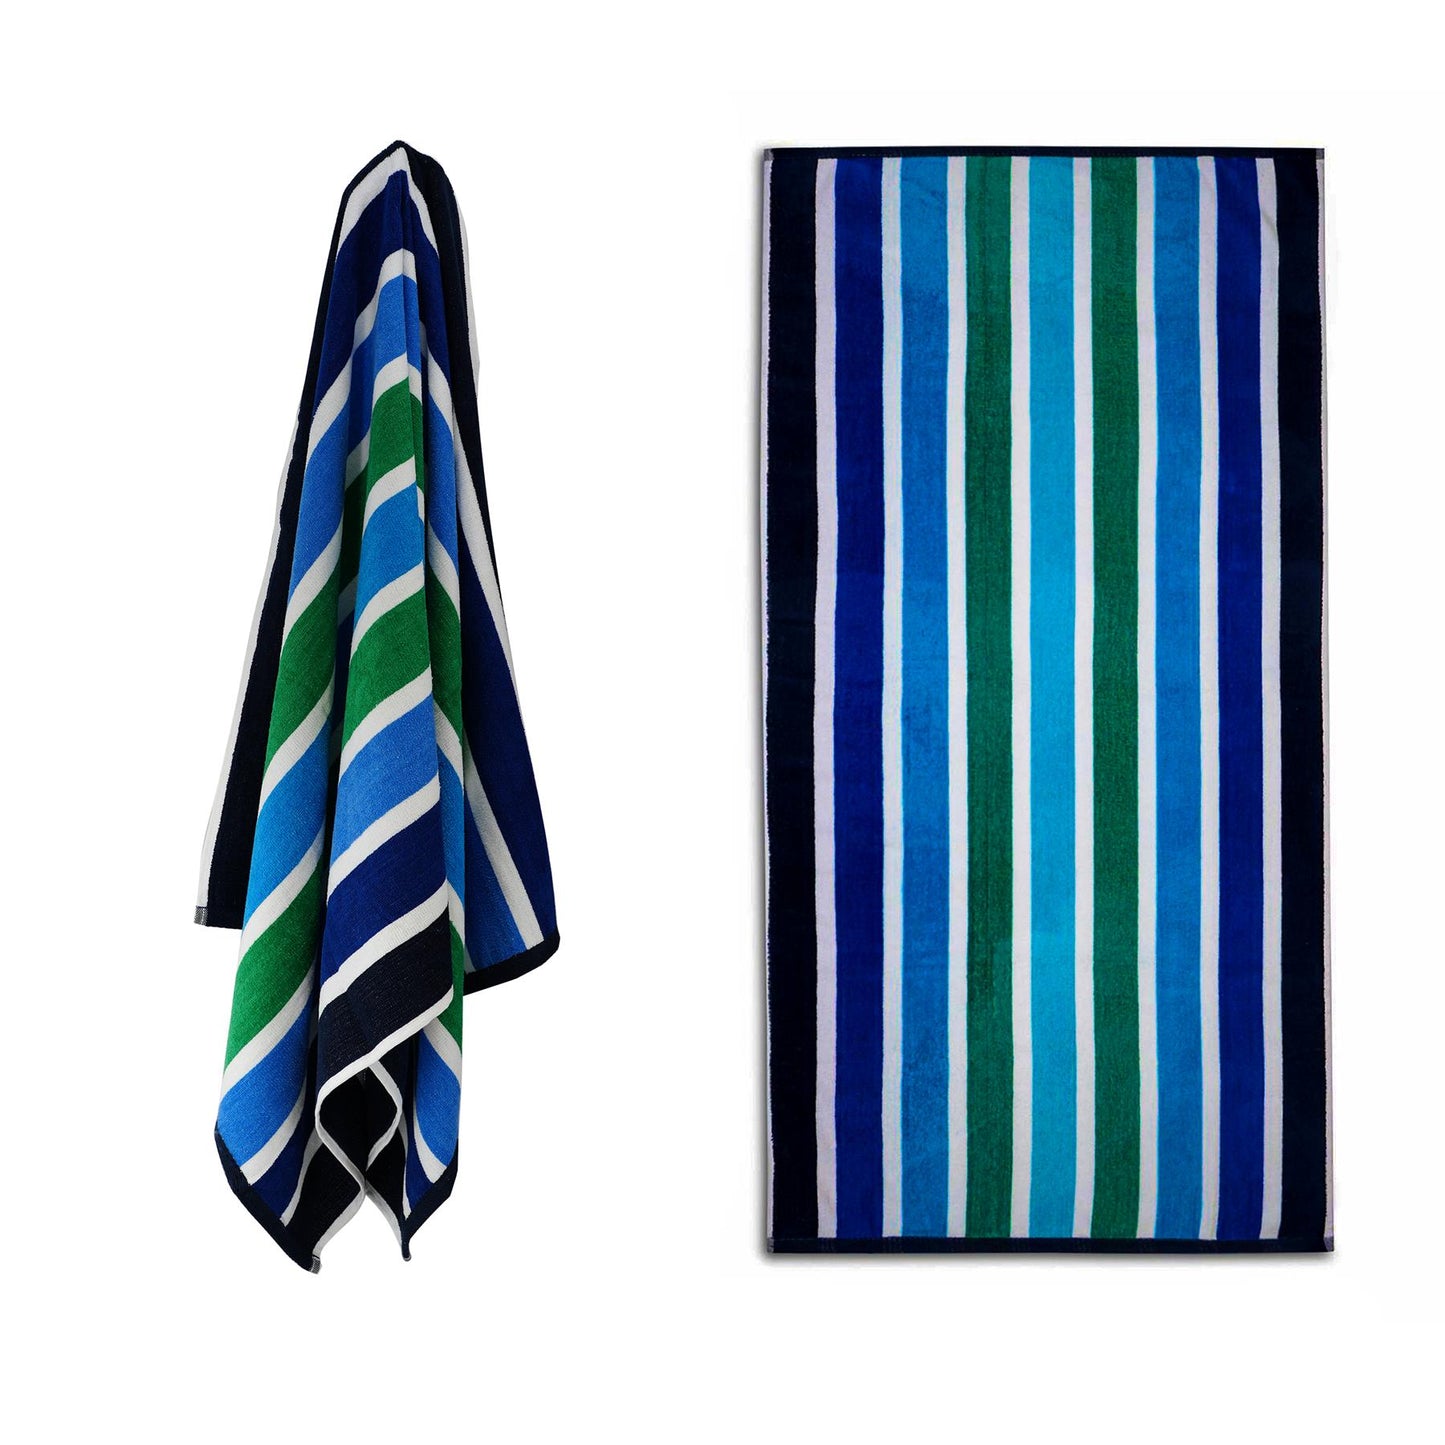 Large Velour Striped Beach Towel (Midnight Oasis) by Geezy - UKBuyZone